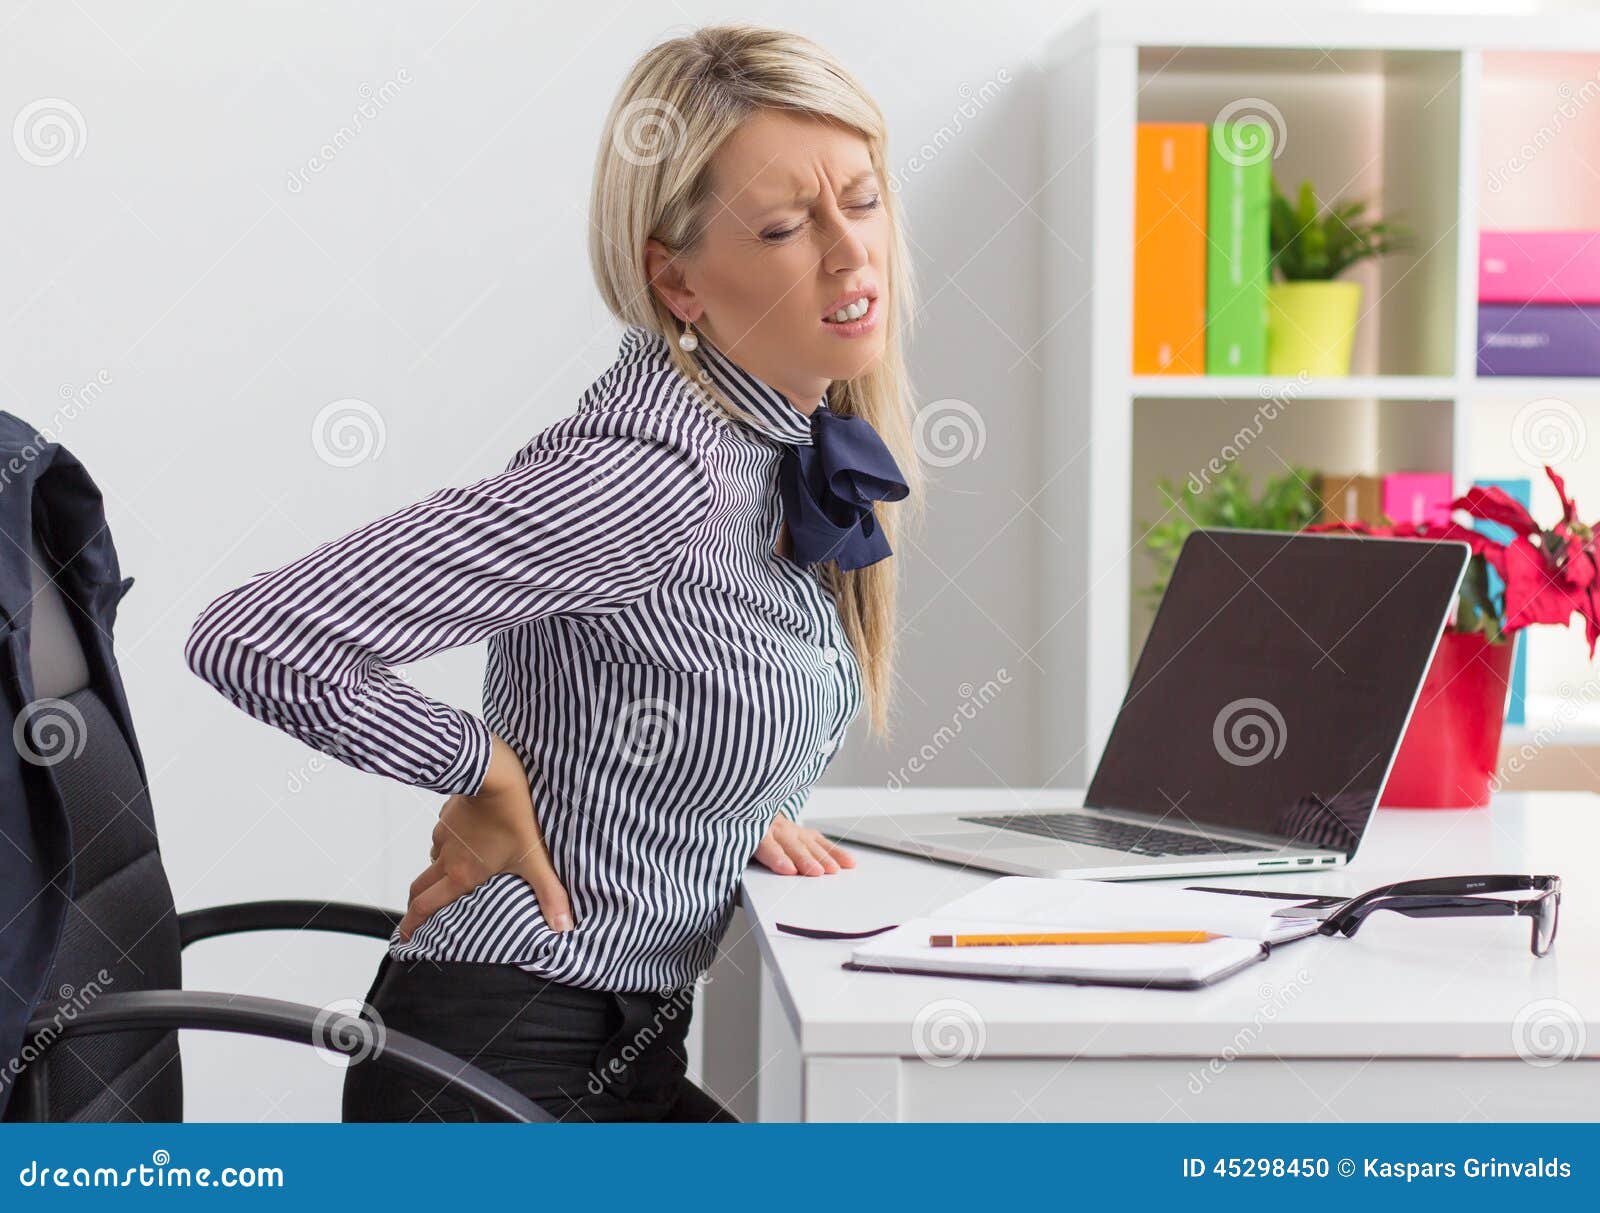 woman having back pain while sitting at desk in office